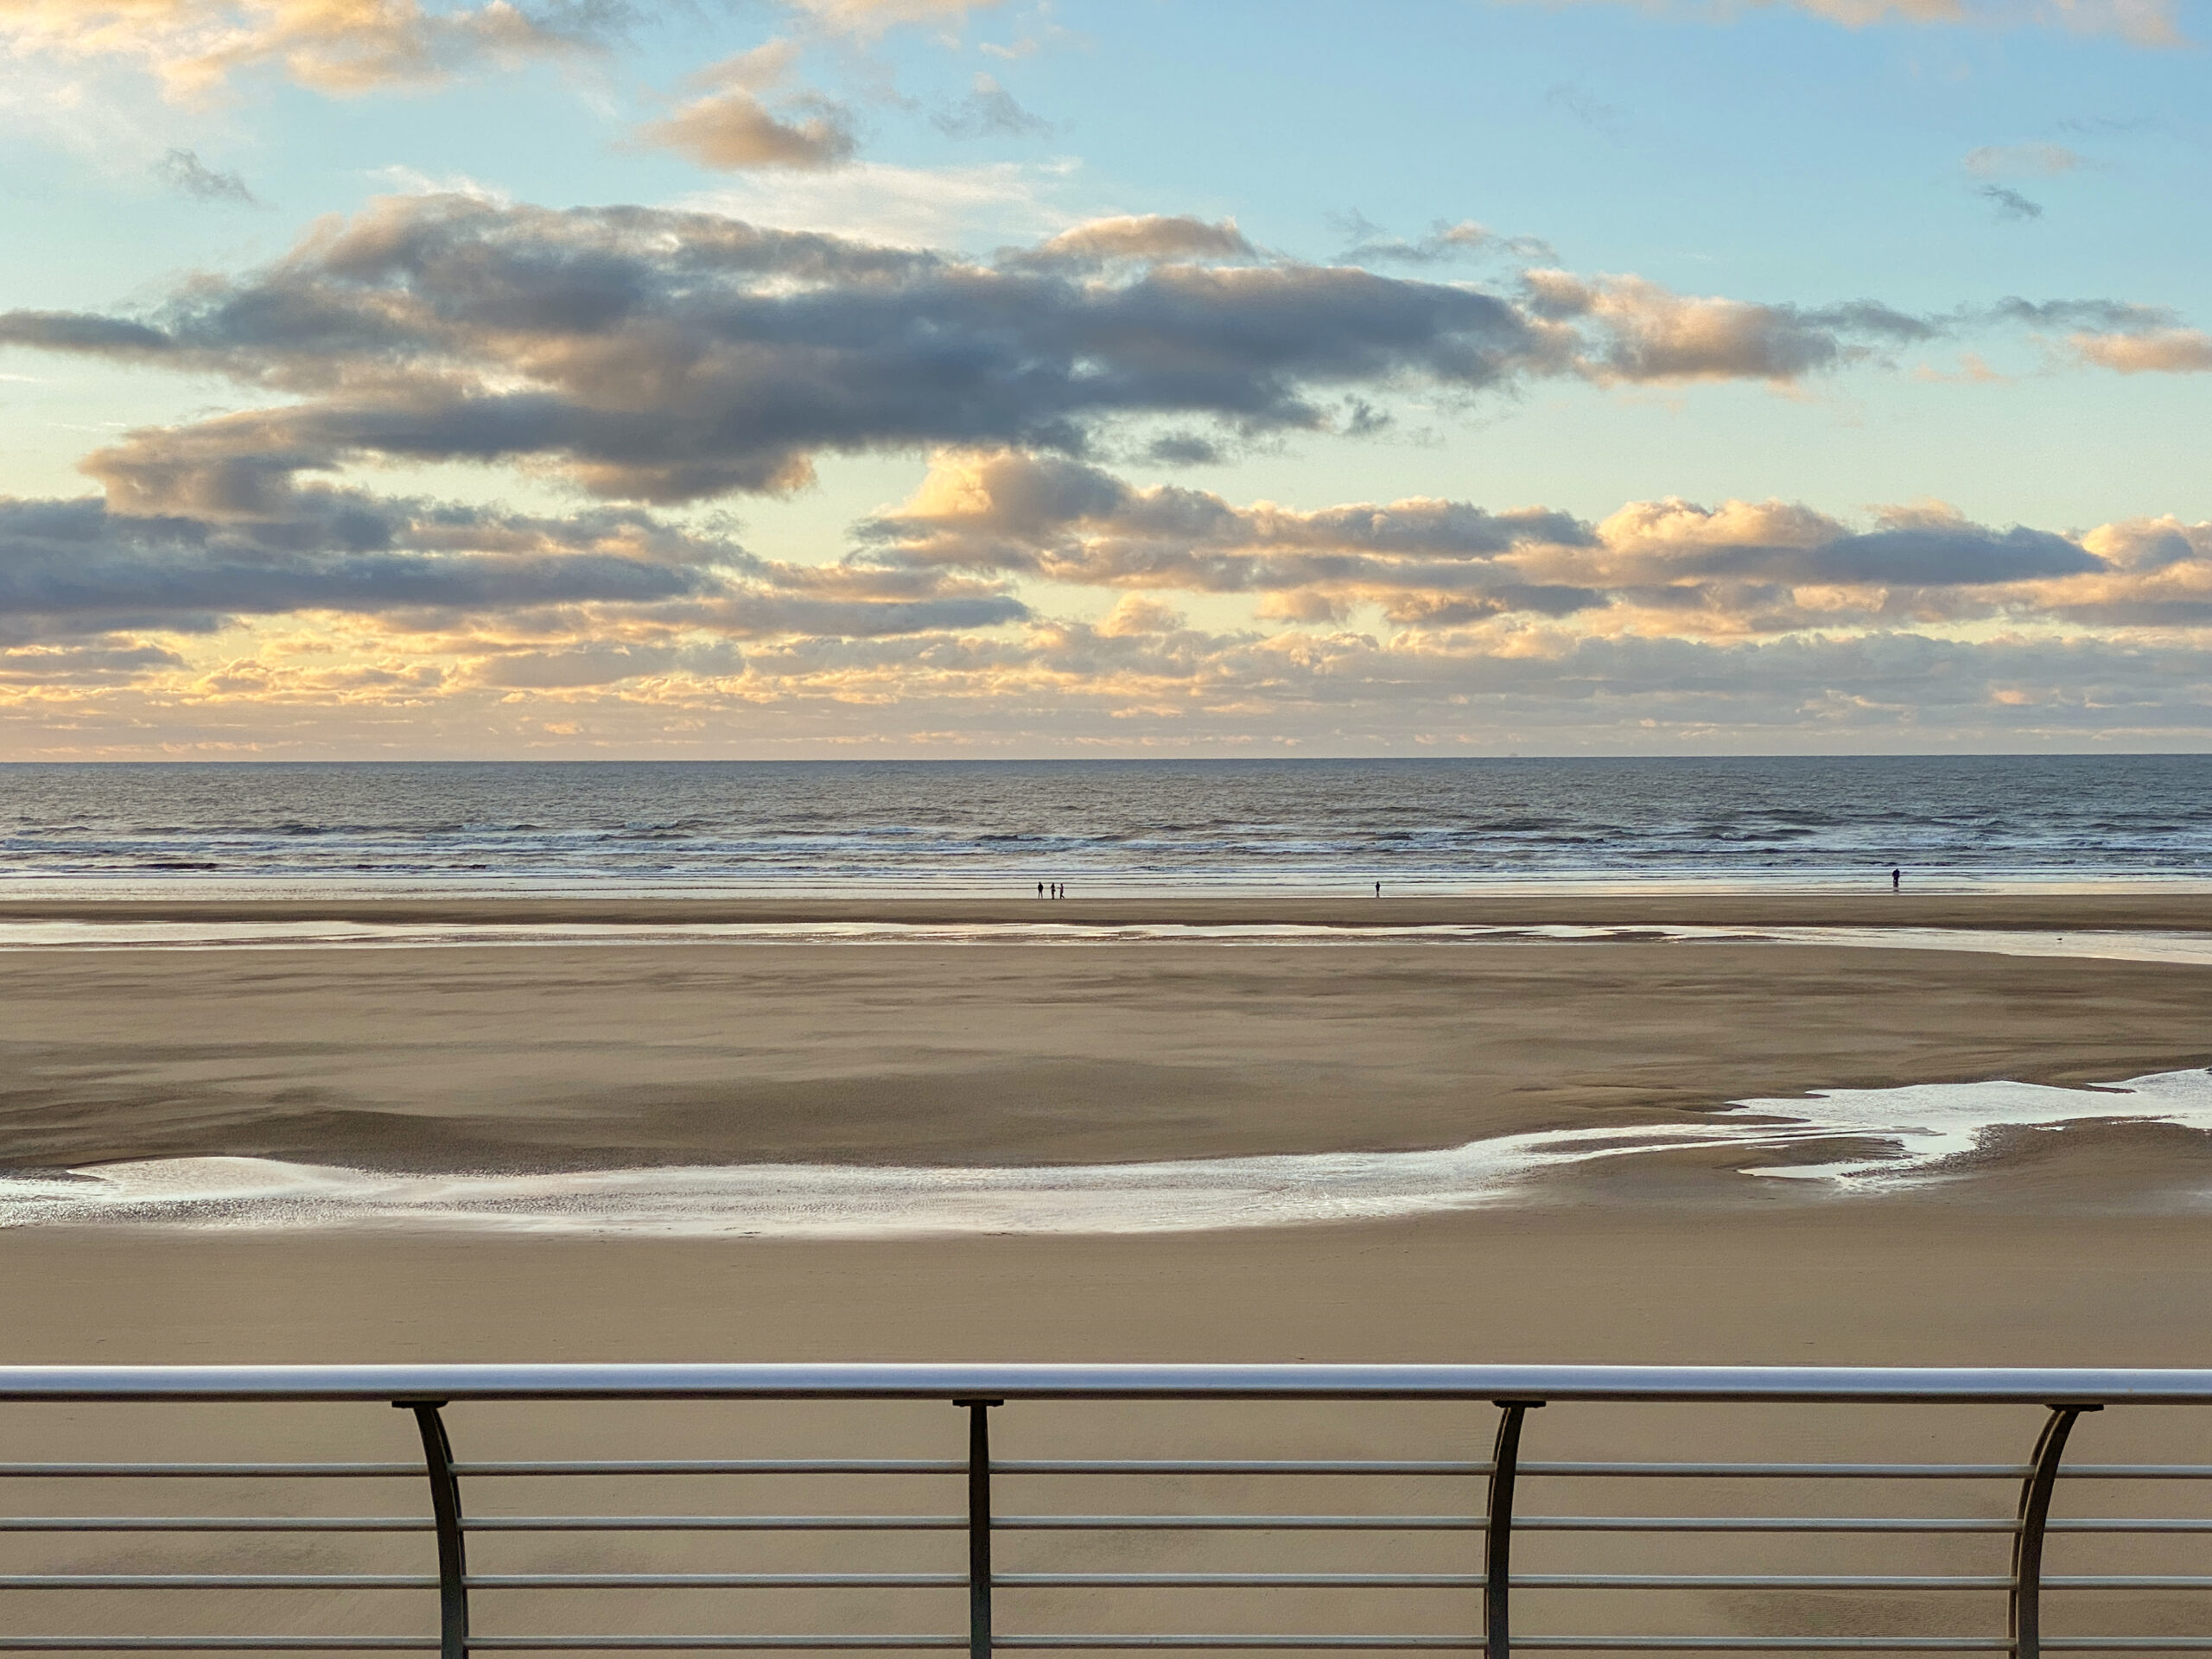 Blackpool Beach - Blackpool is a large seaside resort in the county of Lancashire on the northwest coast of England.